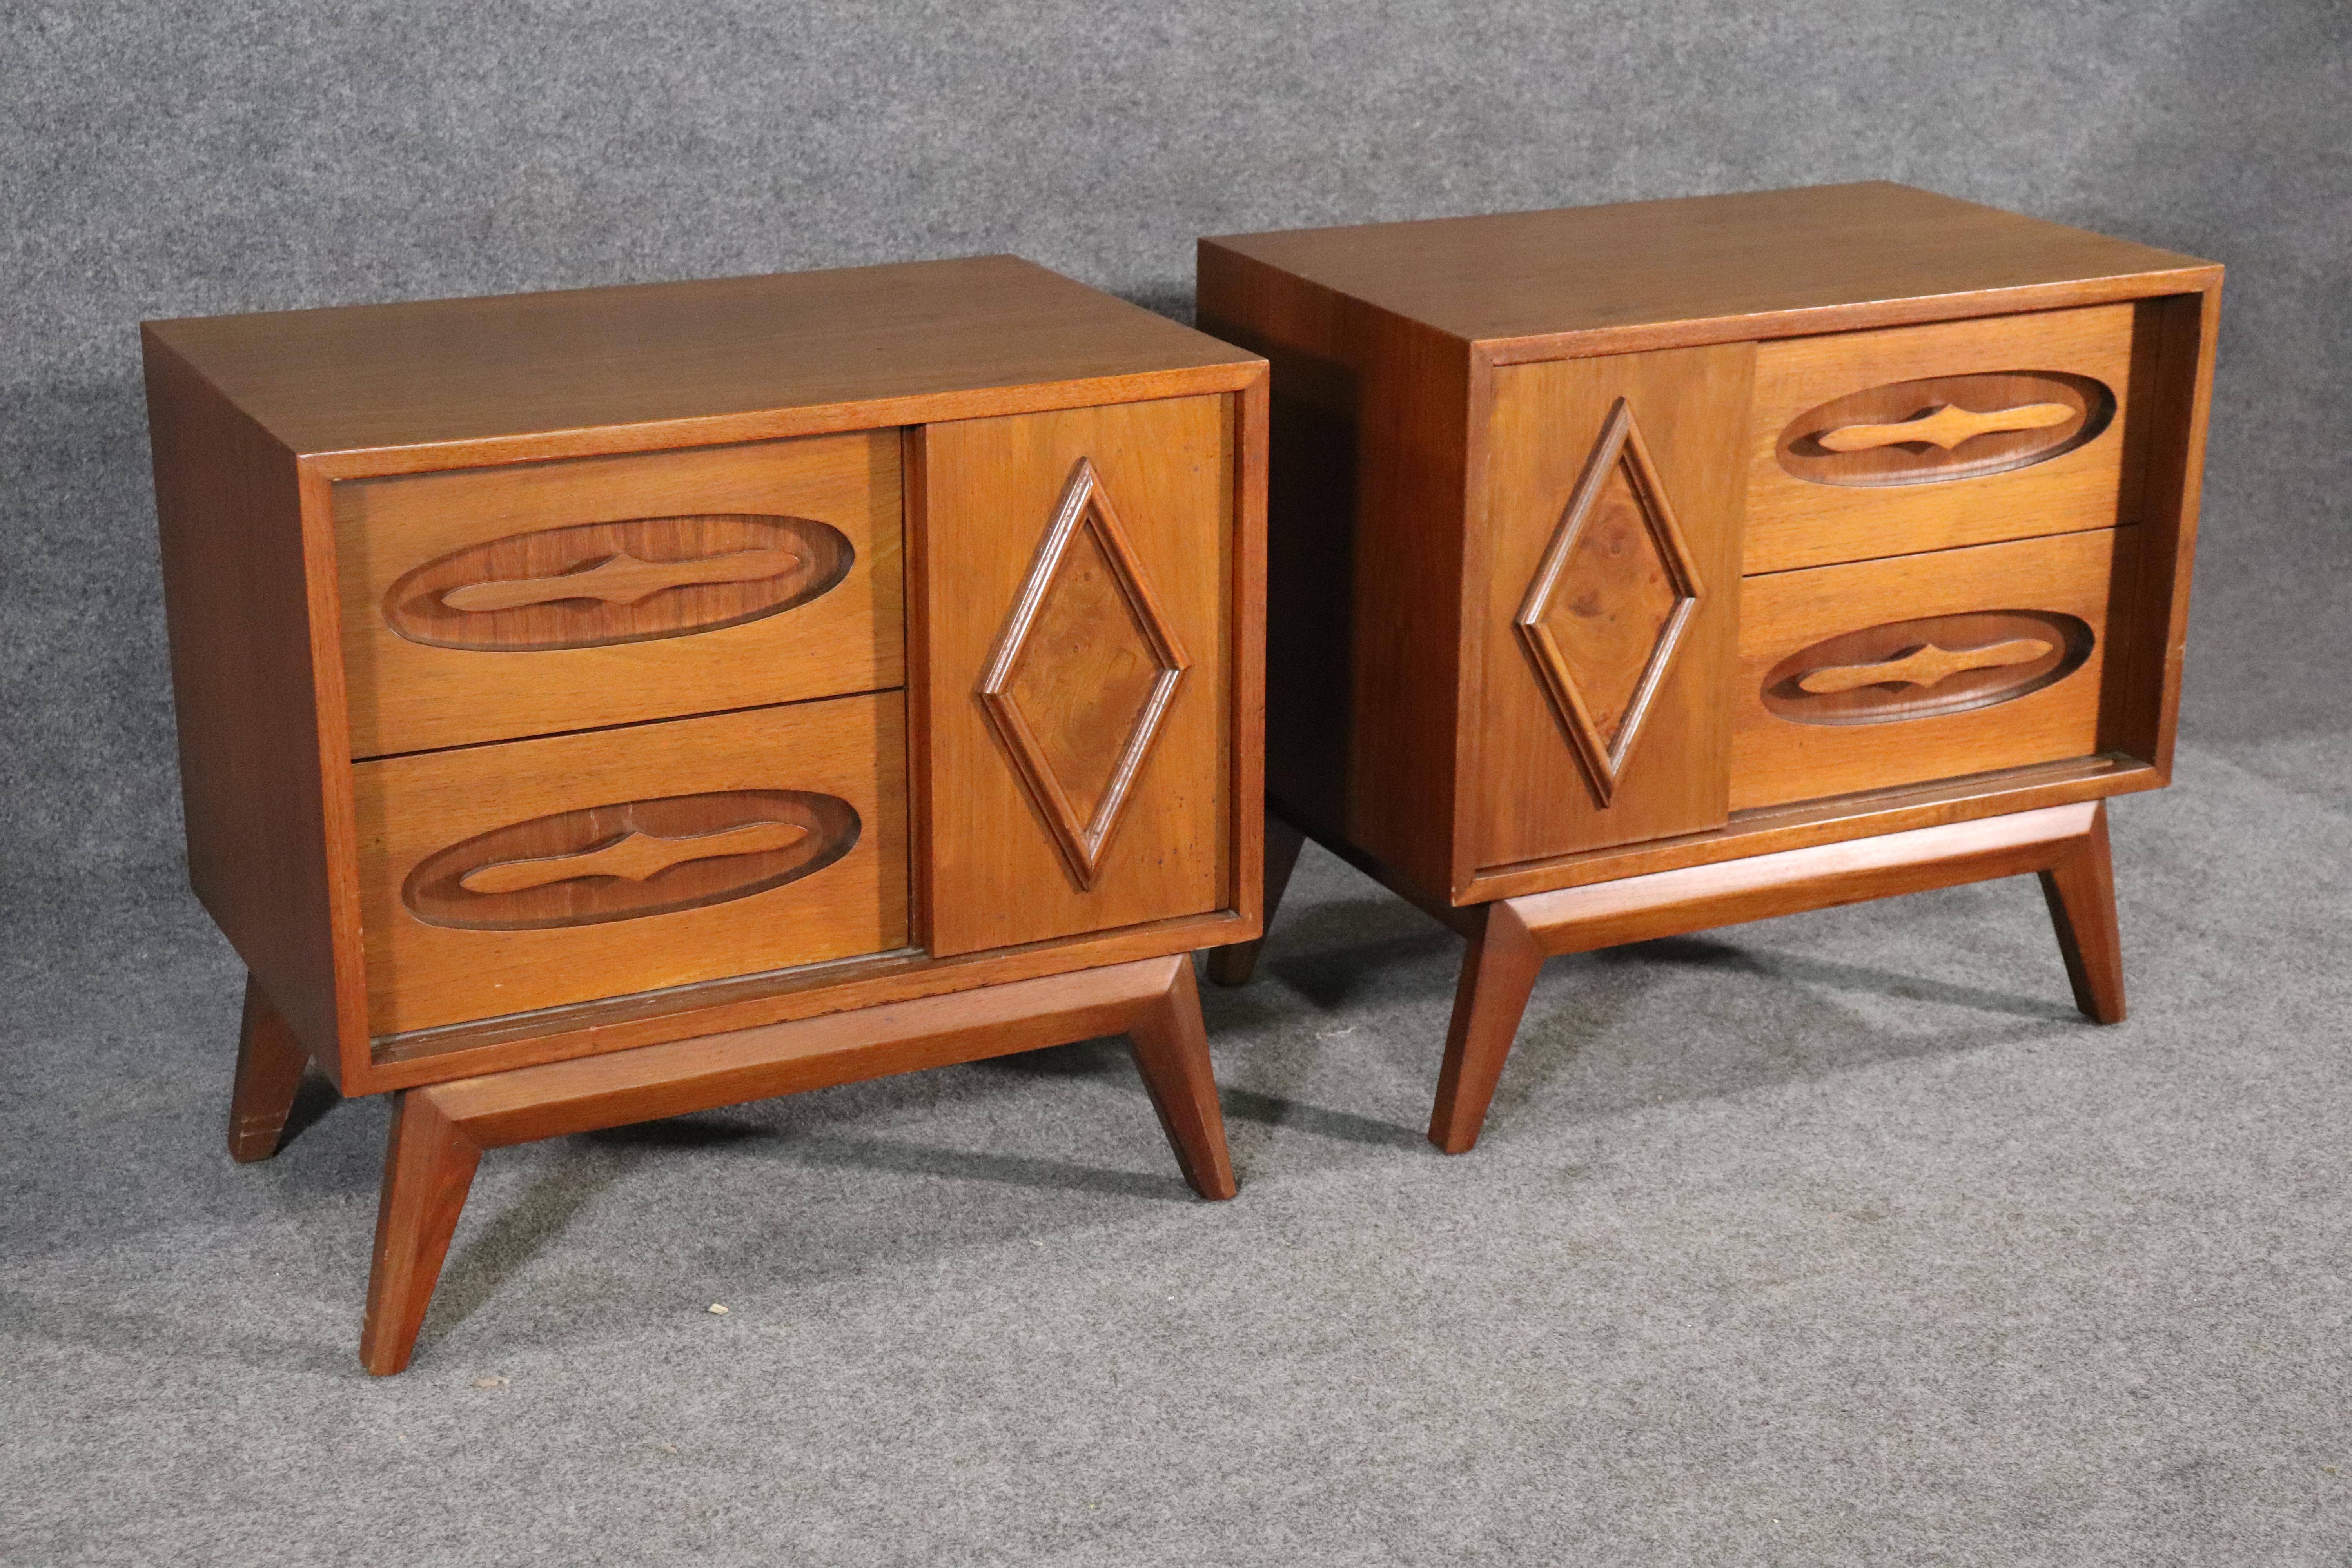 Pair of mid-century modern end tables with storage. Two drawers with sculpted handles, plus sliding door to reveal secret cabinet space.
Please confirm location NY or NJ